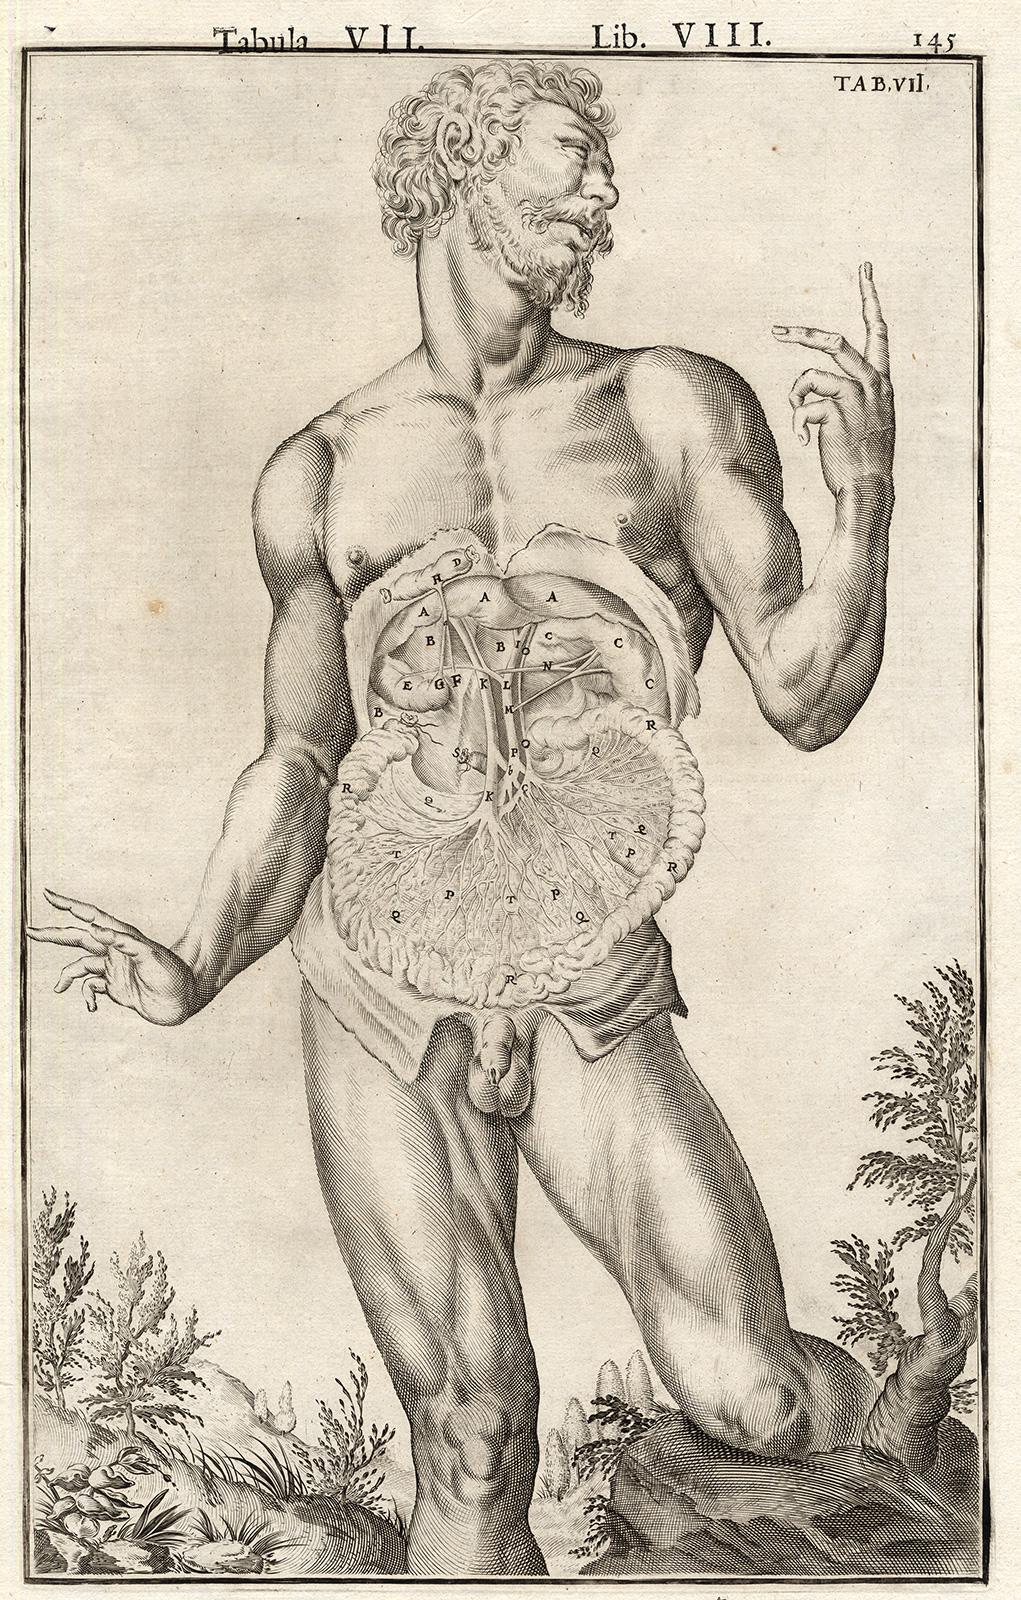 Subject: Very rare anatomical print. Plate, Lib. VIII, Tab. VI-VII. Set of 2 plates, showing portraits of standing naked men from the knee up, showing the abdominal cavity. Both men are depicted against decorated background. As the key to this